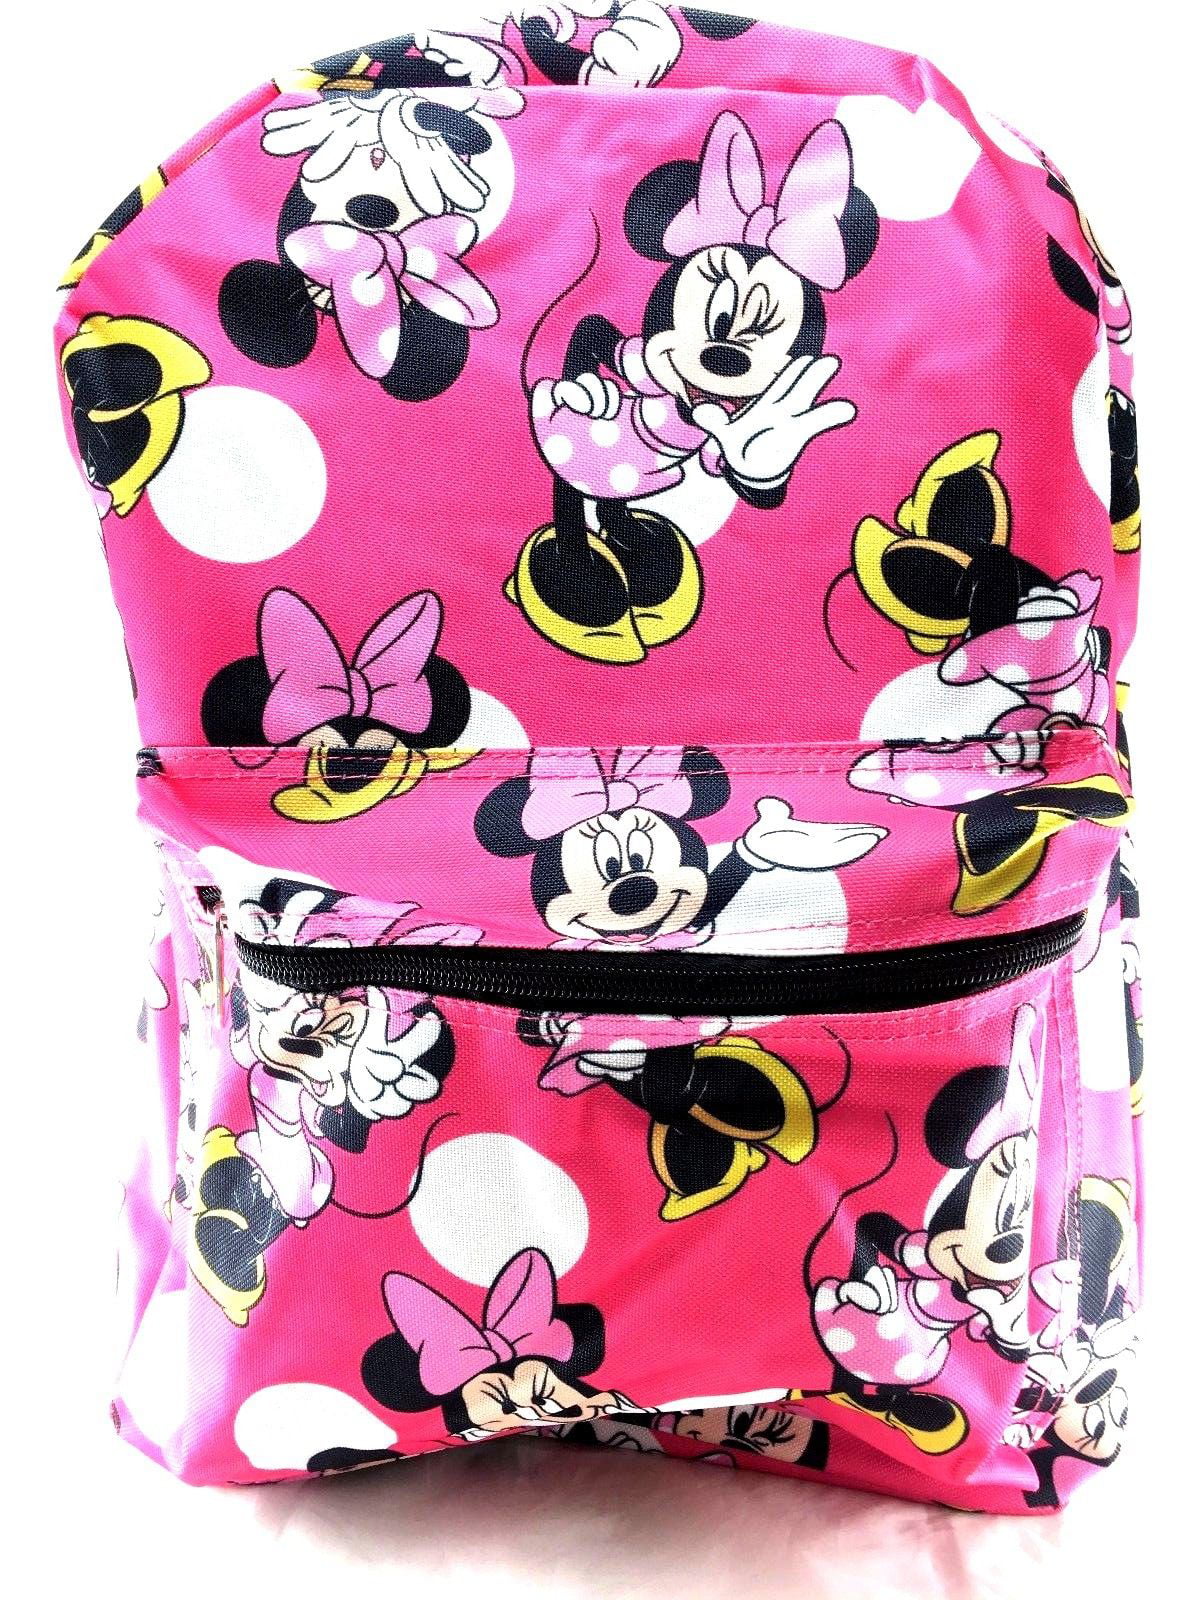 NEW Disney Minnie Mouse White Allover Print 16" Girls Large School Backpack